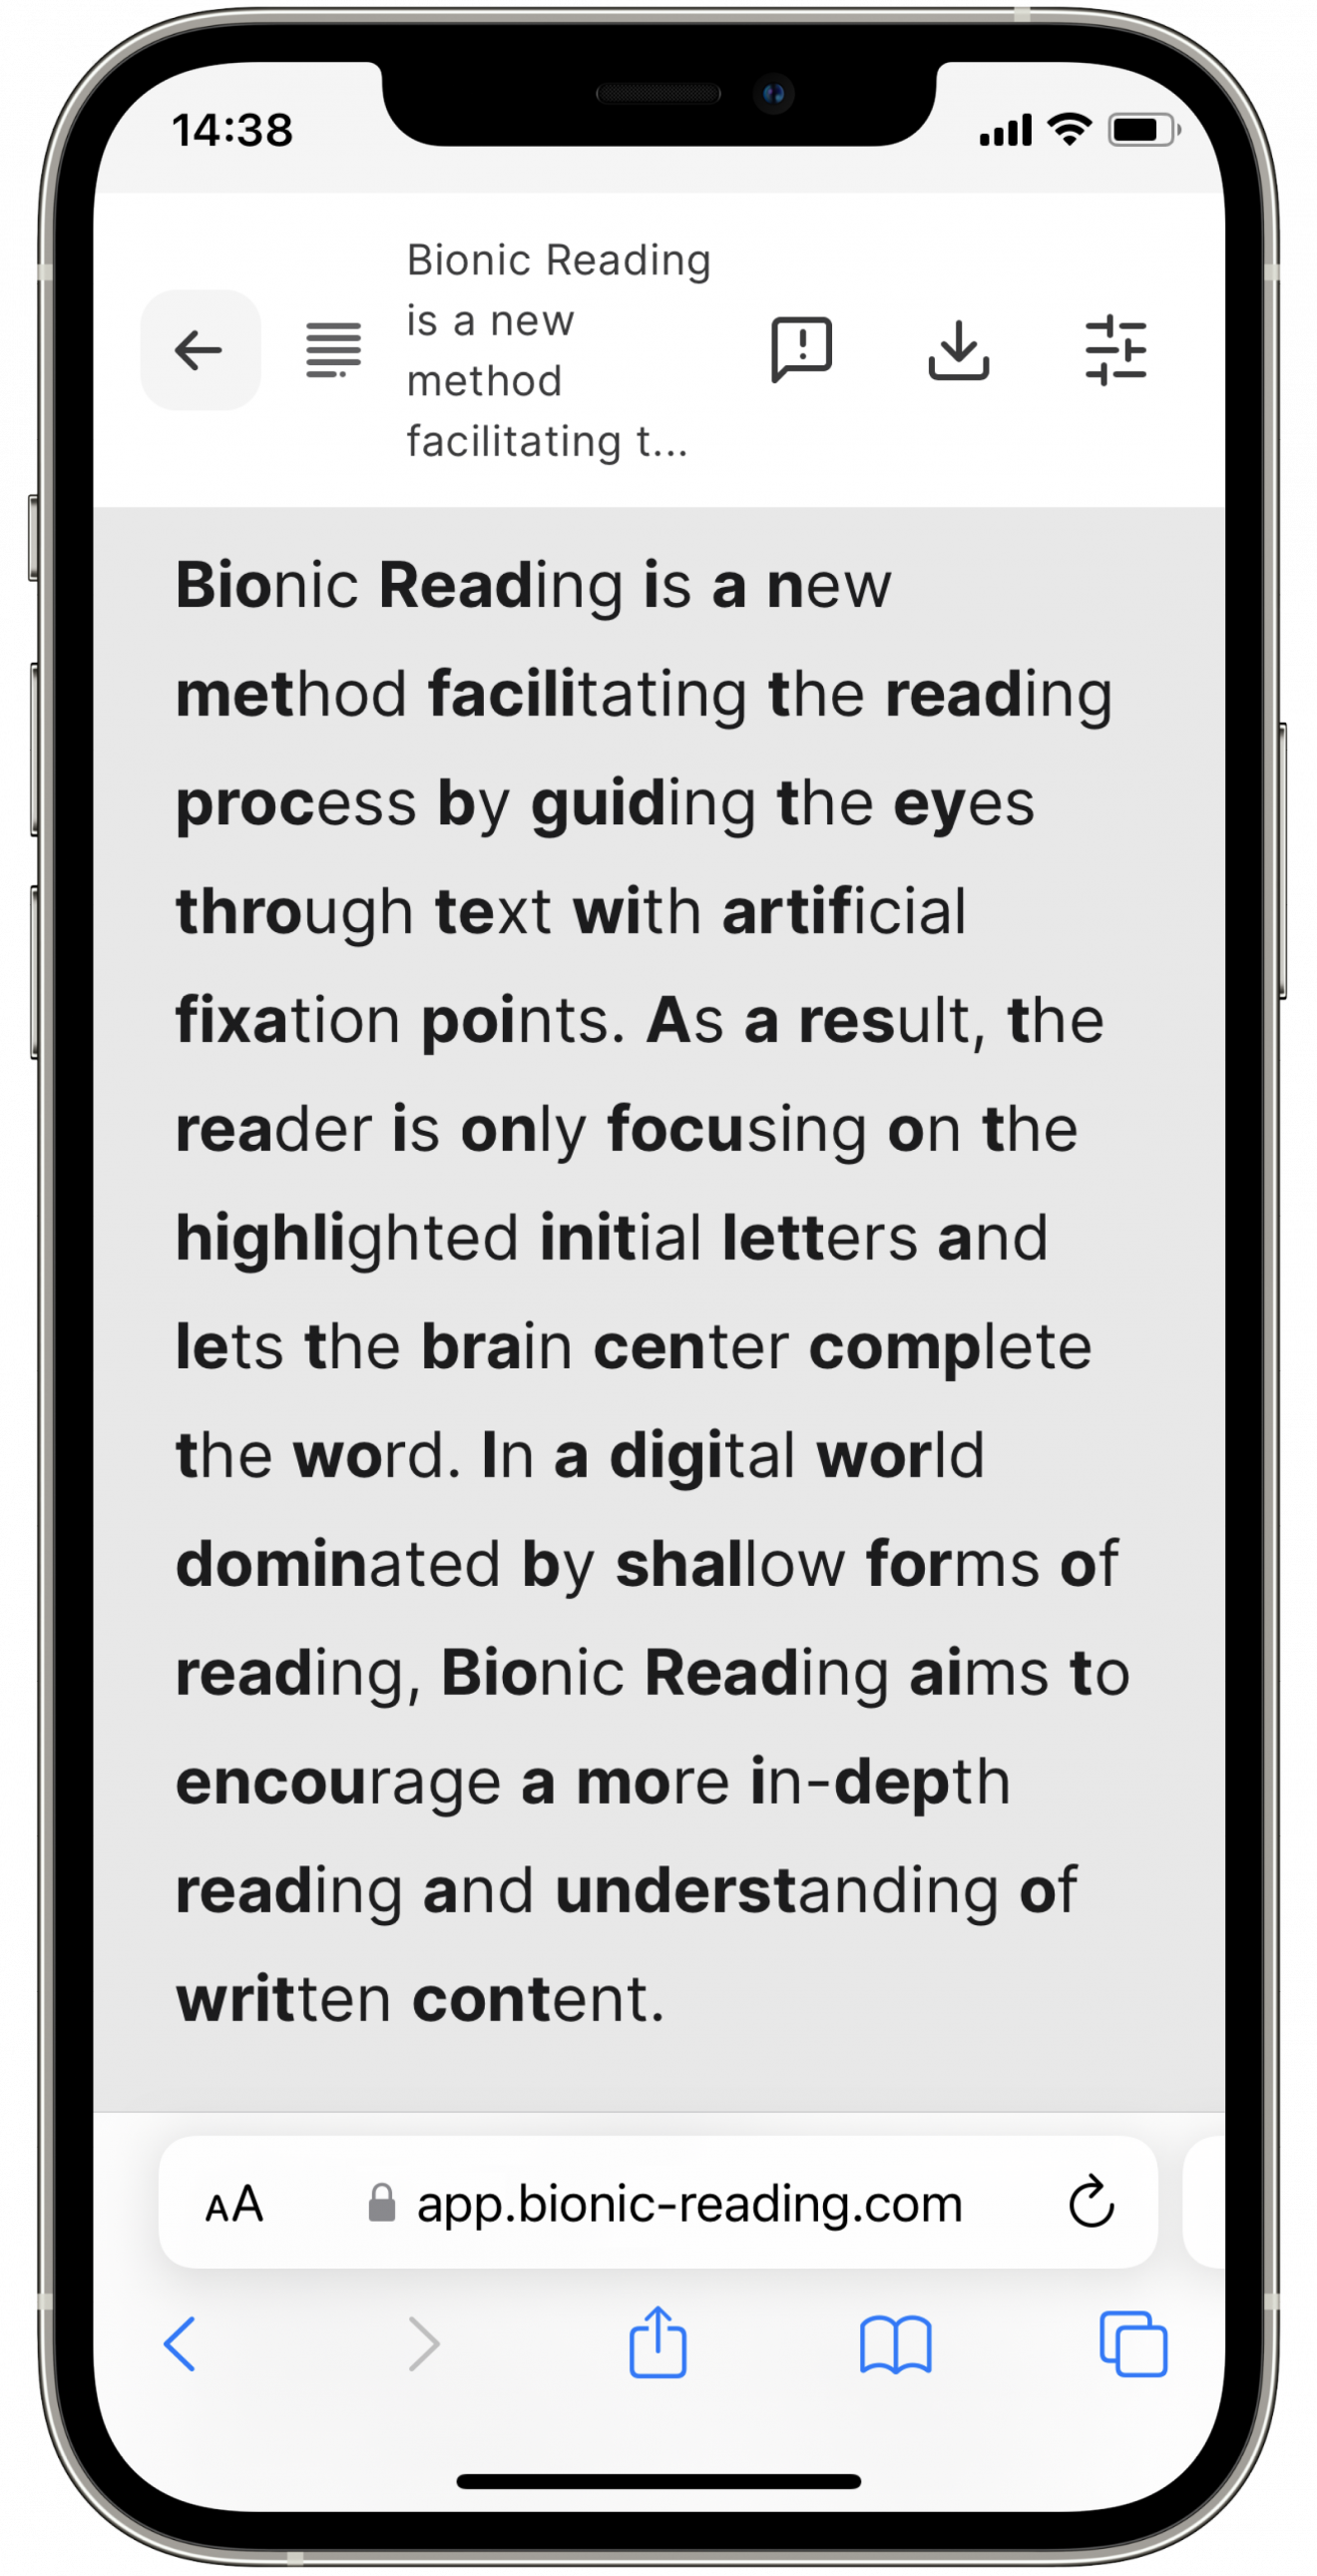 Bionic reading is a new method facilitating the reading process by guiding the eyes through text with artificial fixation points. As a result, the reader is only focusing on the highlighted initial letters and lets the brain center complete the word. In a digital world dominated by shallow forms of reading, Bionic Reading aims to encourage more in-depth reading and understanding of written content.